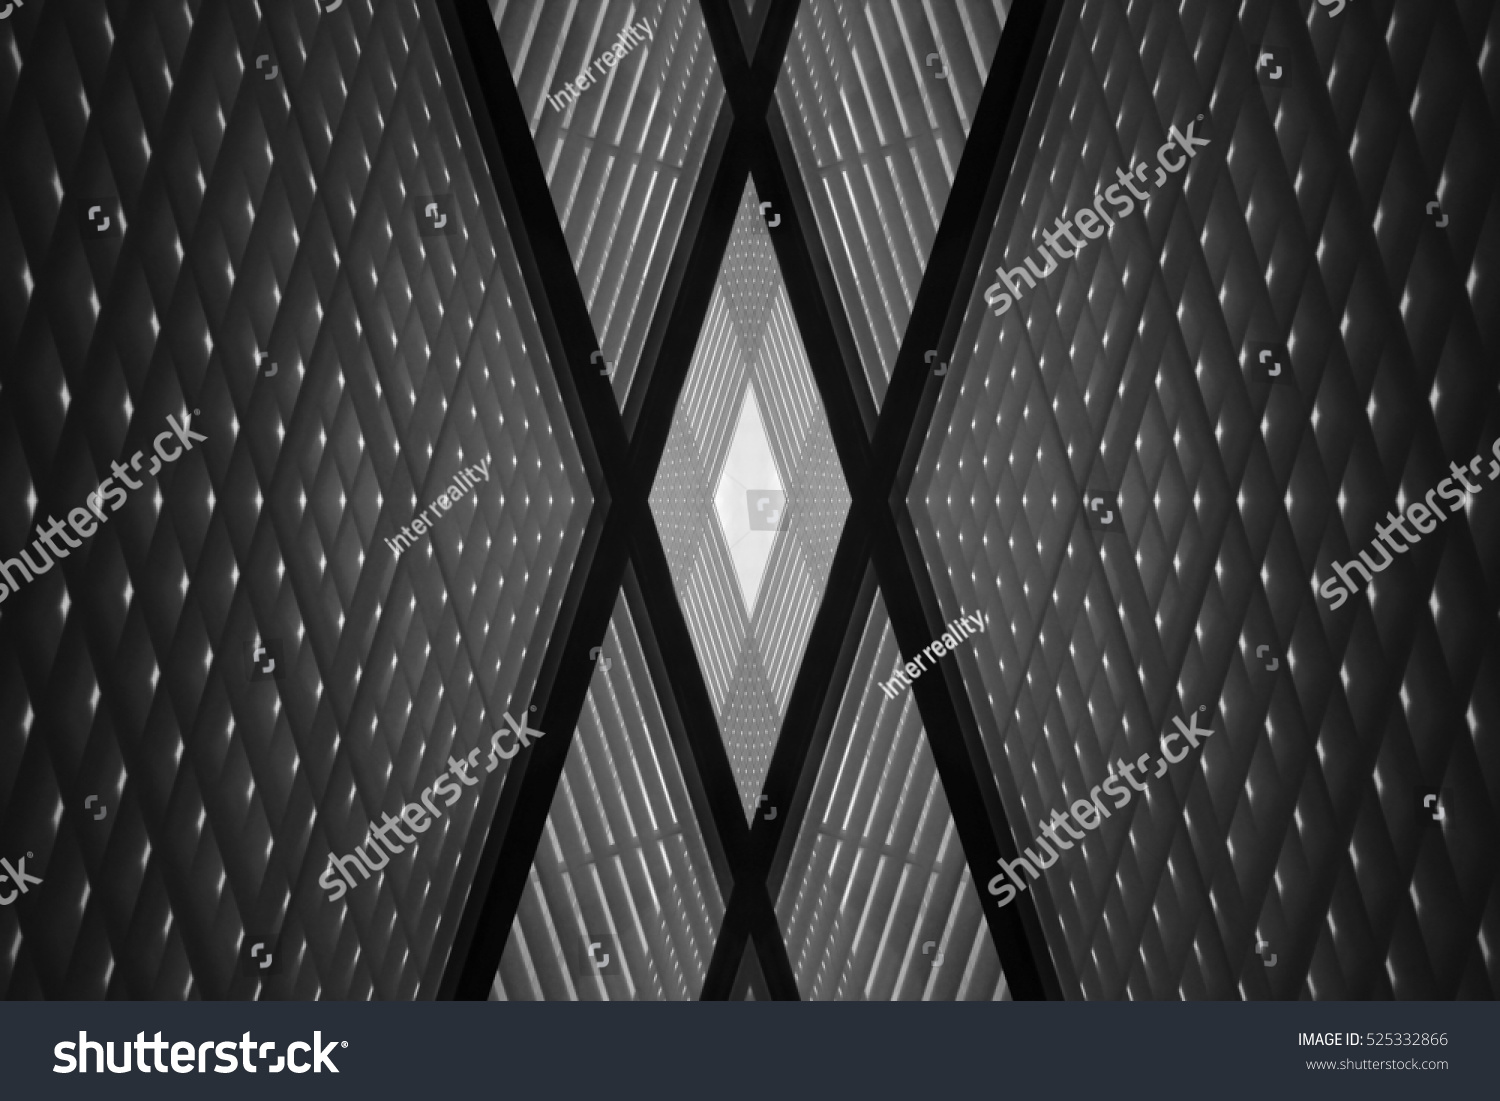 Double exposure photo of sloped walls. Realistic though unreal office interior fragment. Abstract black and white image on the subject of modern architecture. #525332866